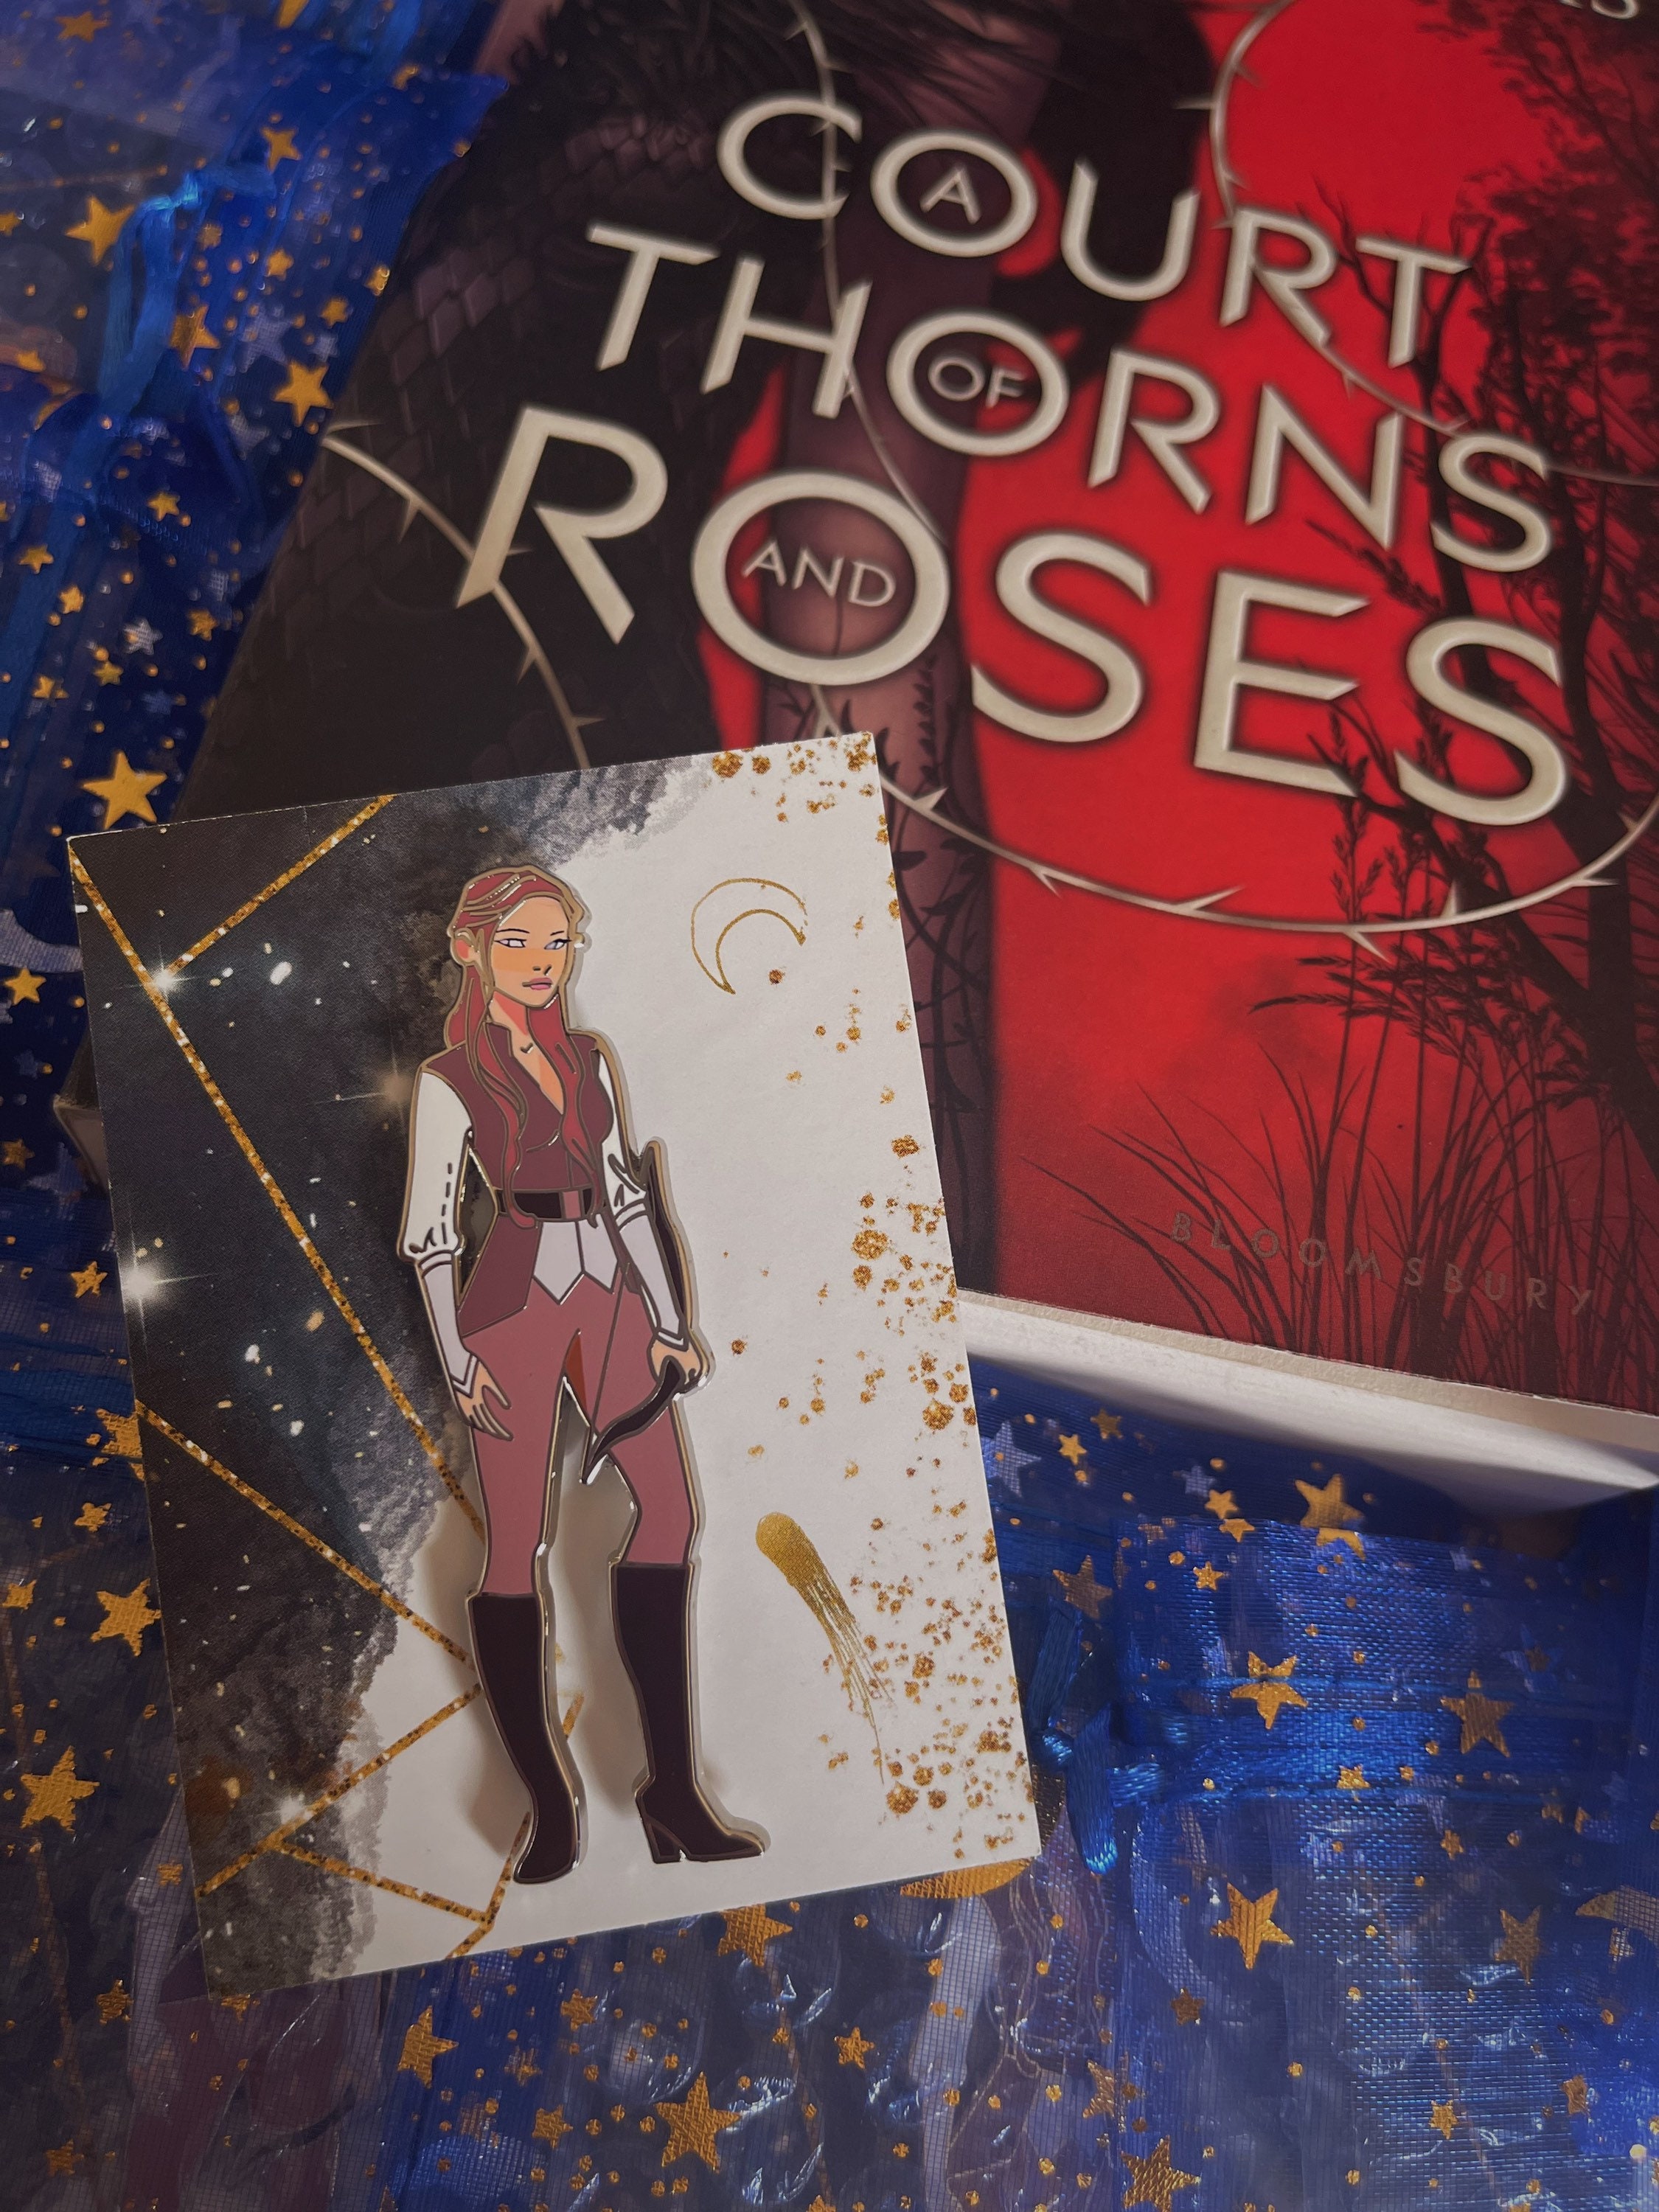 Officially Licensed ACOTAR Print - The Huntress